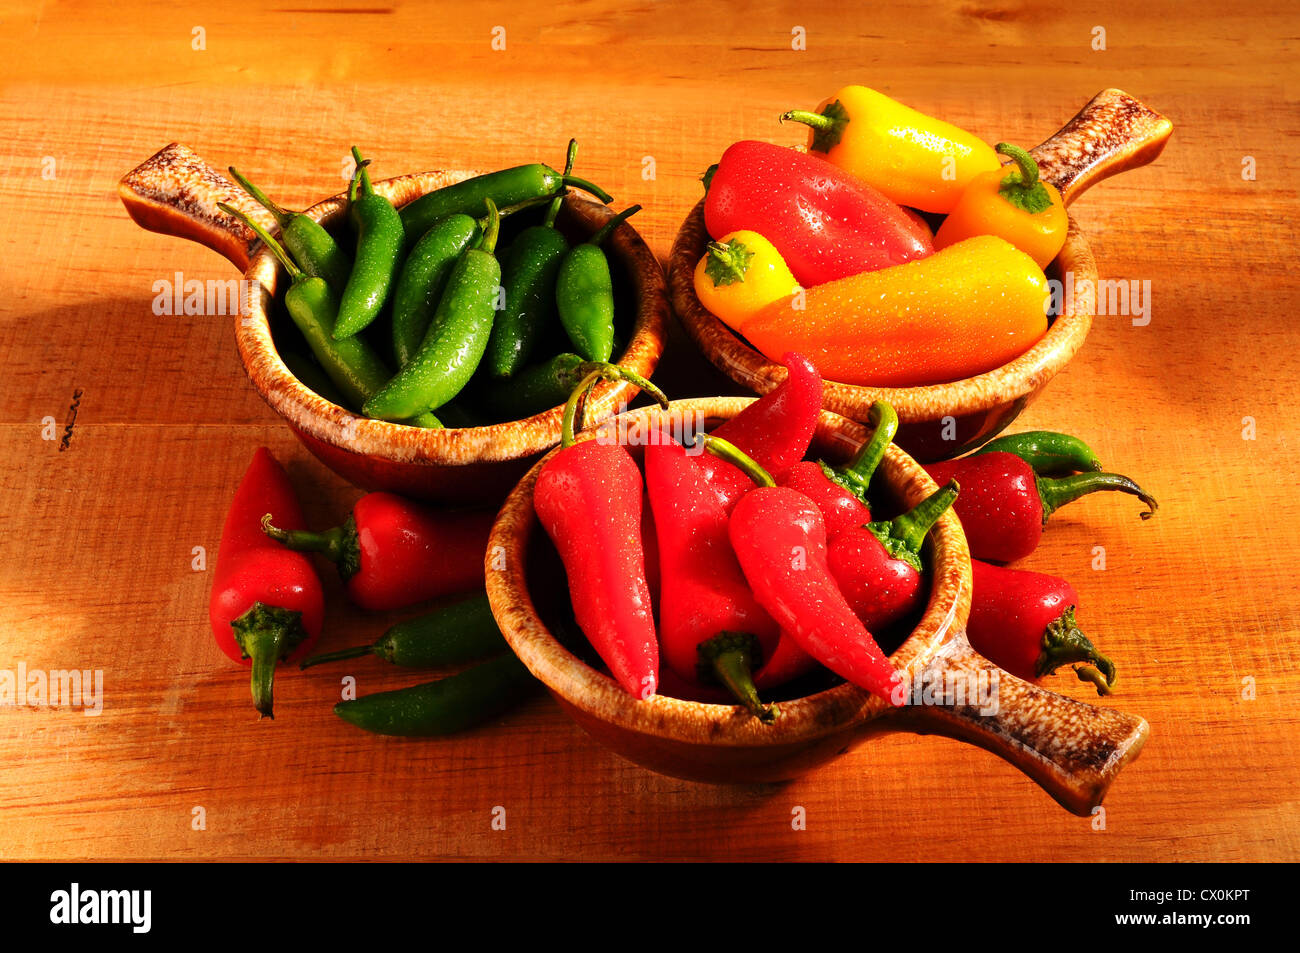 An assortment of Sweet Peppers and Chilies in Bowls on a rustic wooden surface. Stock Photo